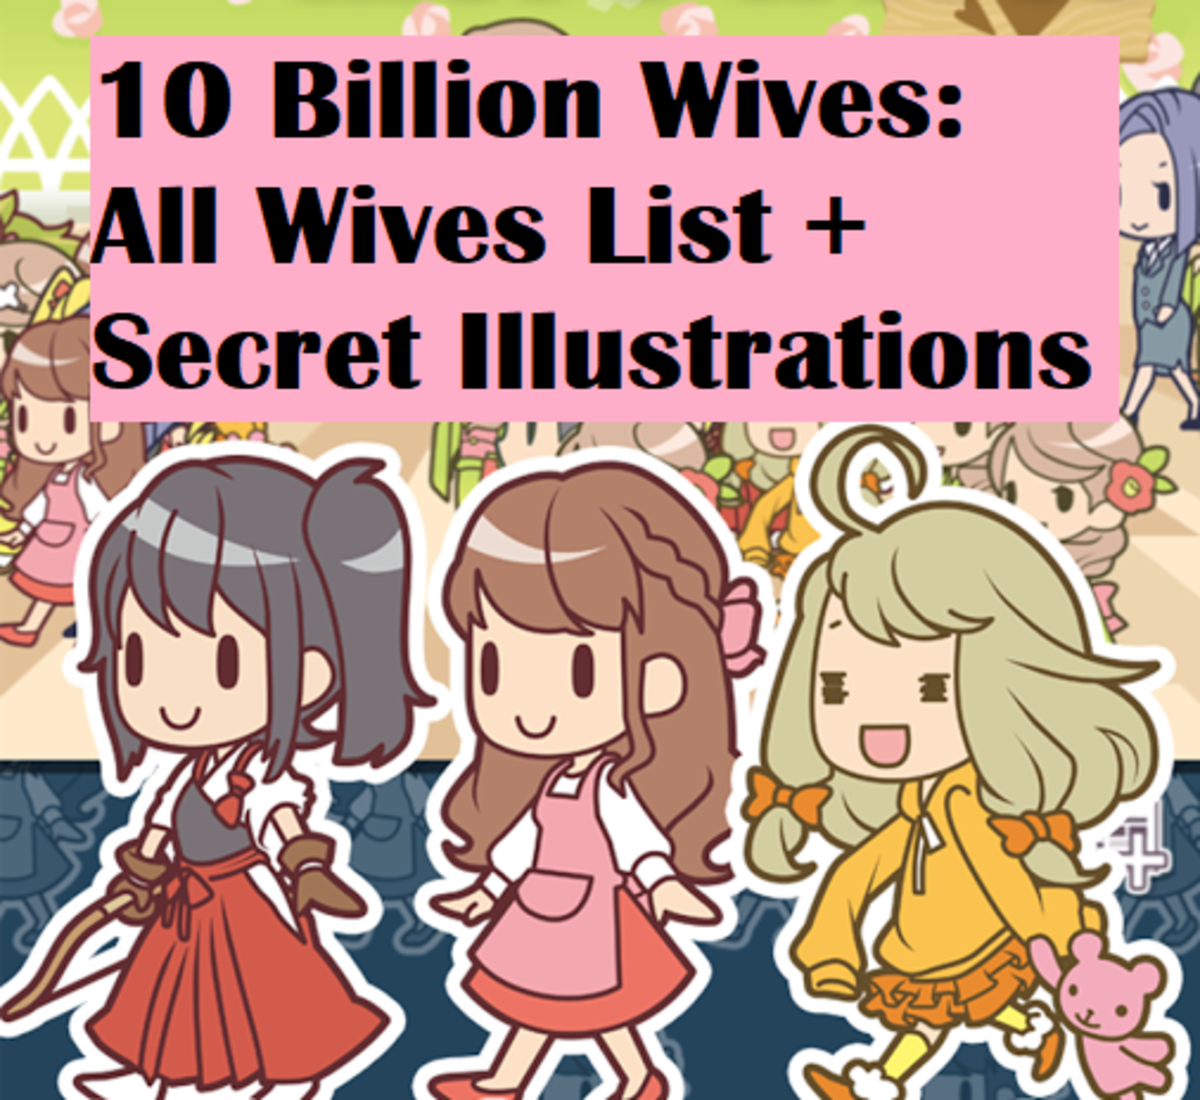 10B Wives: All Wives List and Secret Illustrations